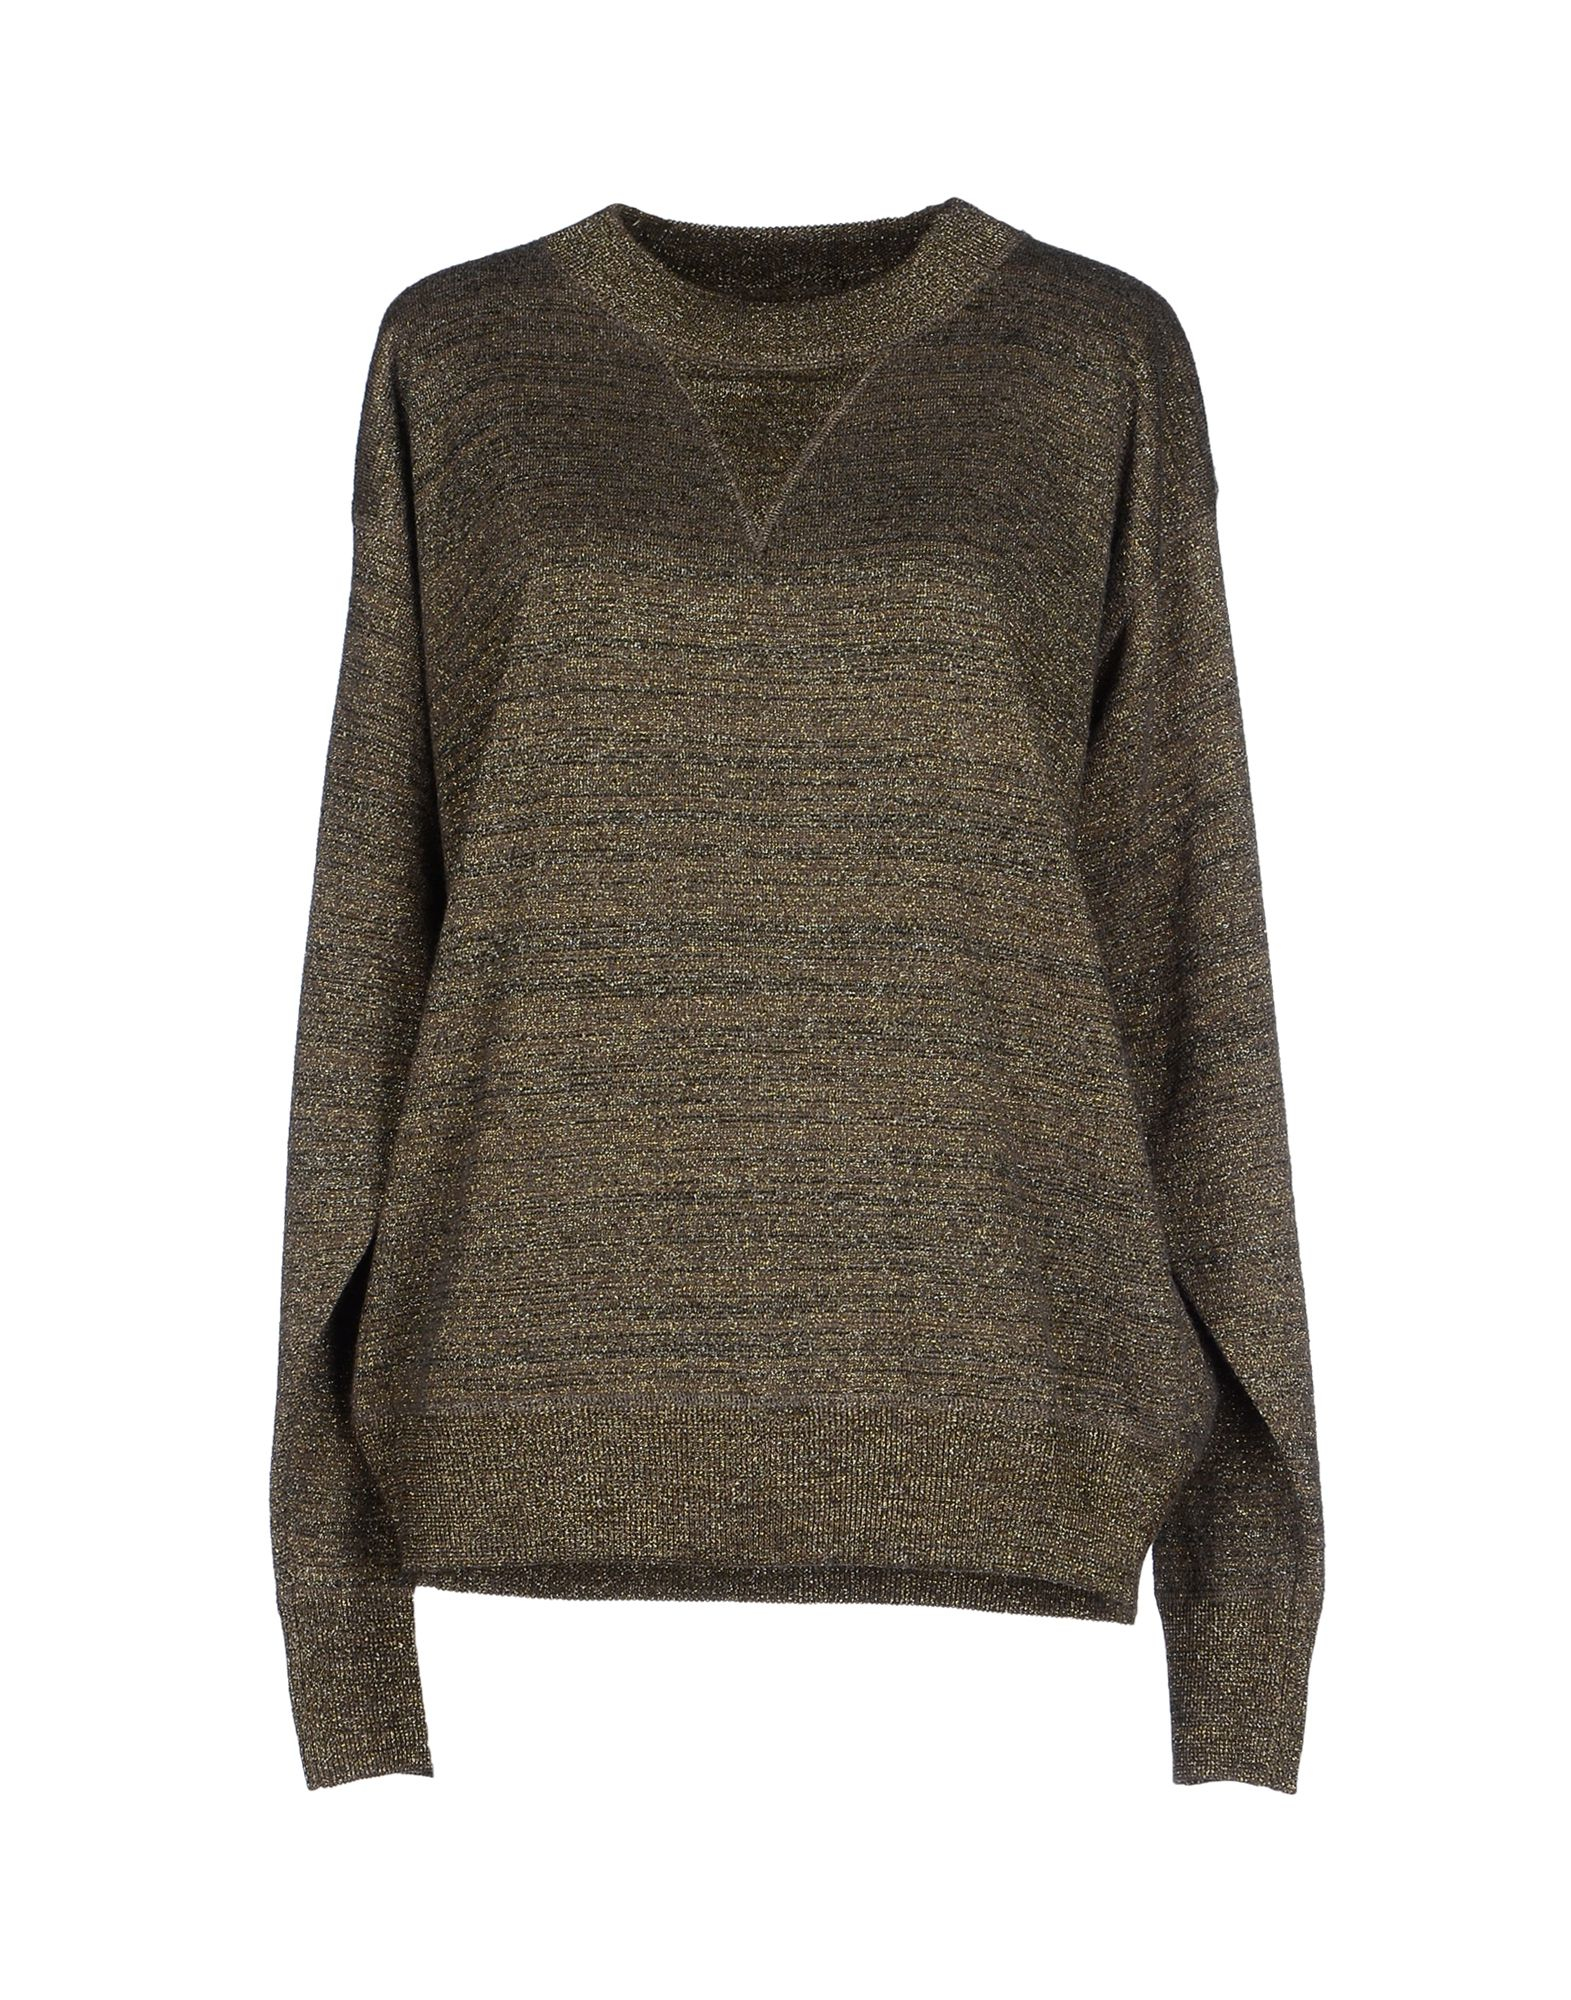 Lyst - Isabel marant Sweater in Natural